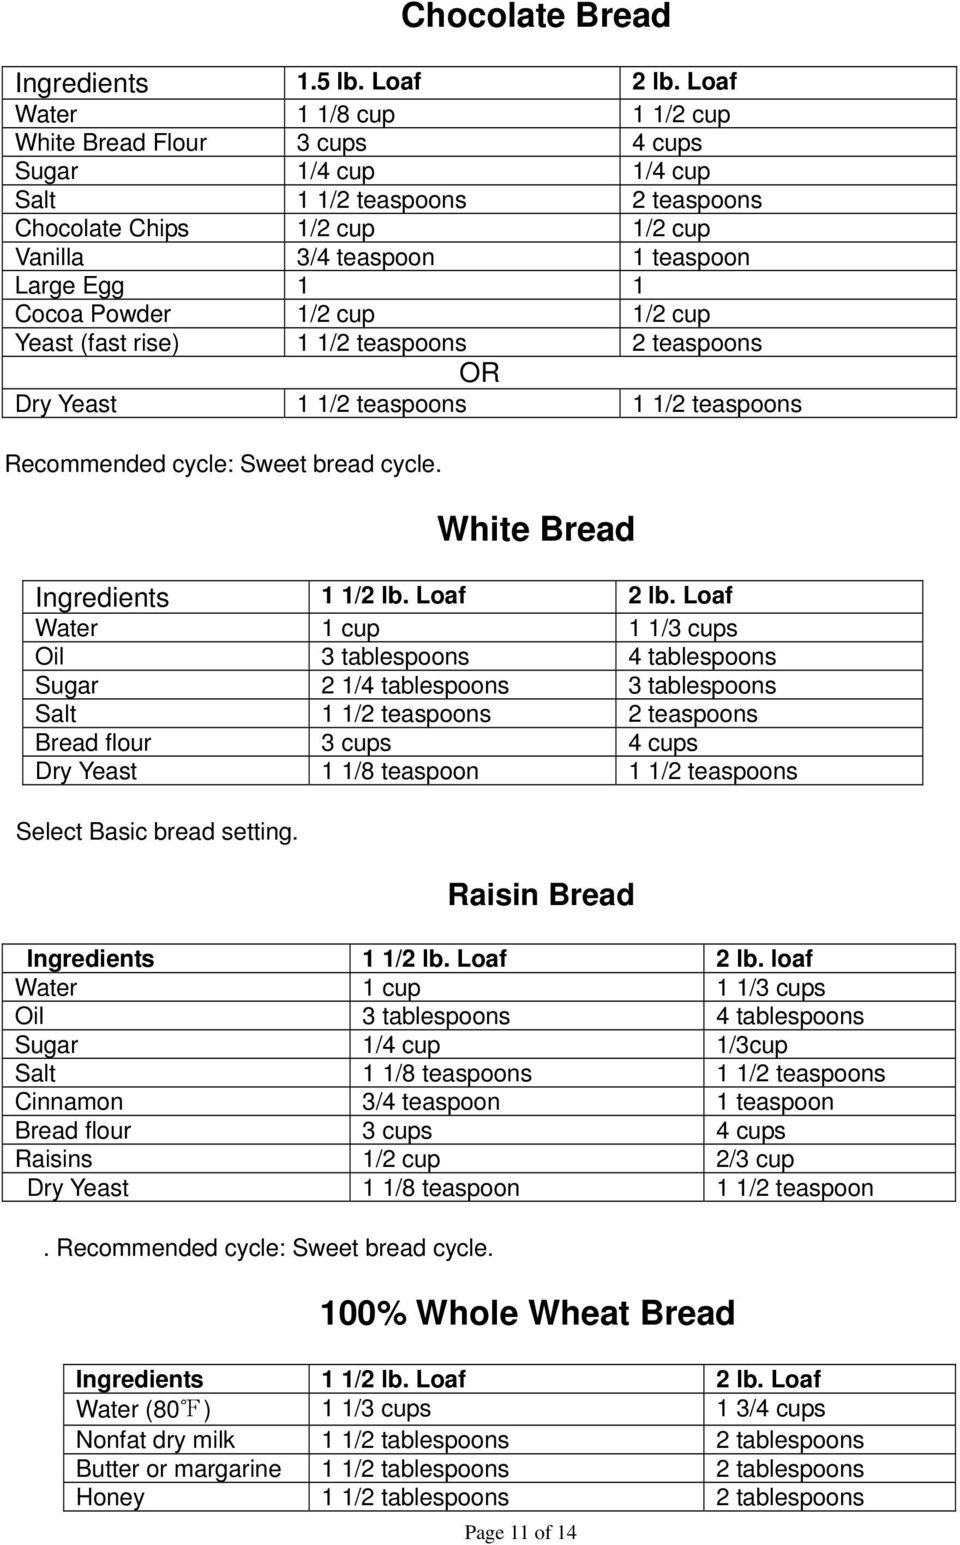 Cocoa Powder 1/2 cup 1/2 cup Yeast (fast rise) 1 1/2 teaspoons 2 teaspoons OR Dry Yeast 1 1/2 teaspoons 1 1/2 teaspoons Recommended cycle: Sweet bread cycle. White Bread Ingredients 1 1/2 lb.